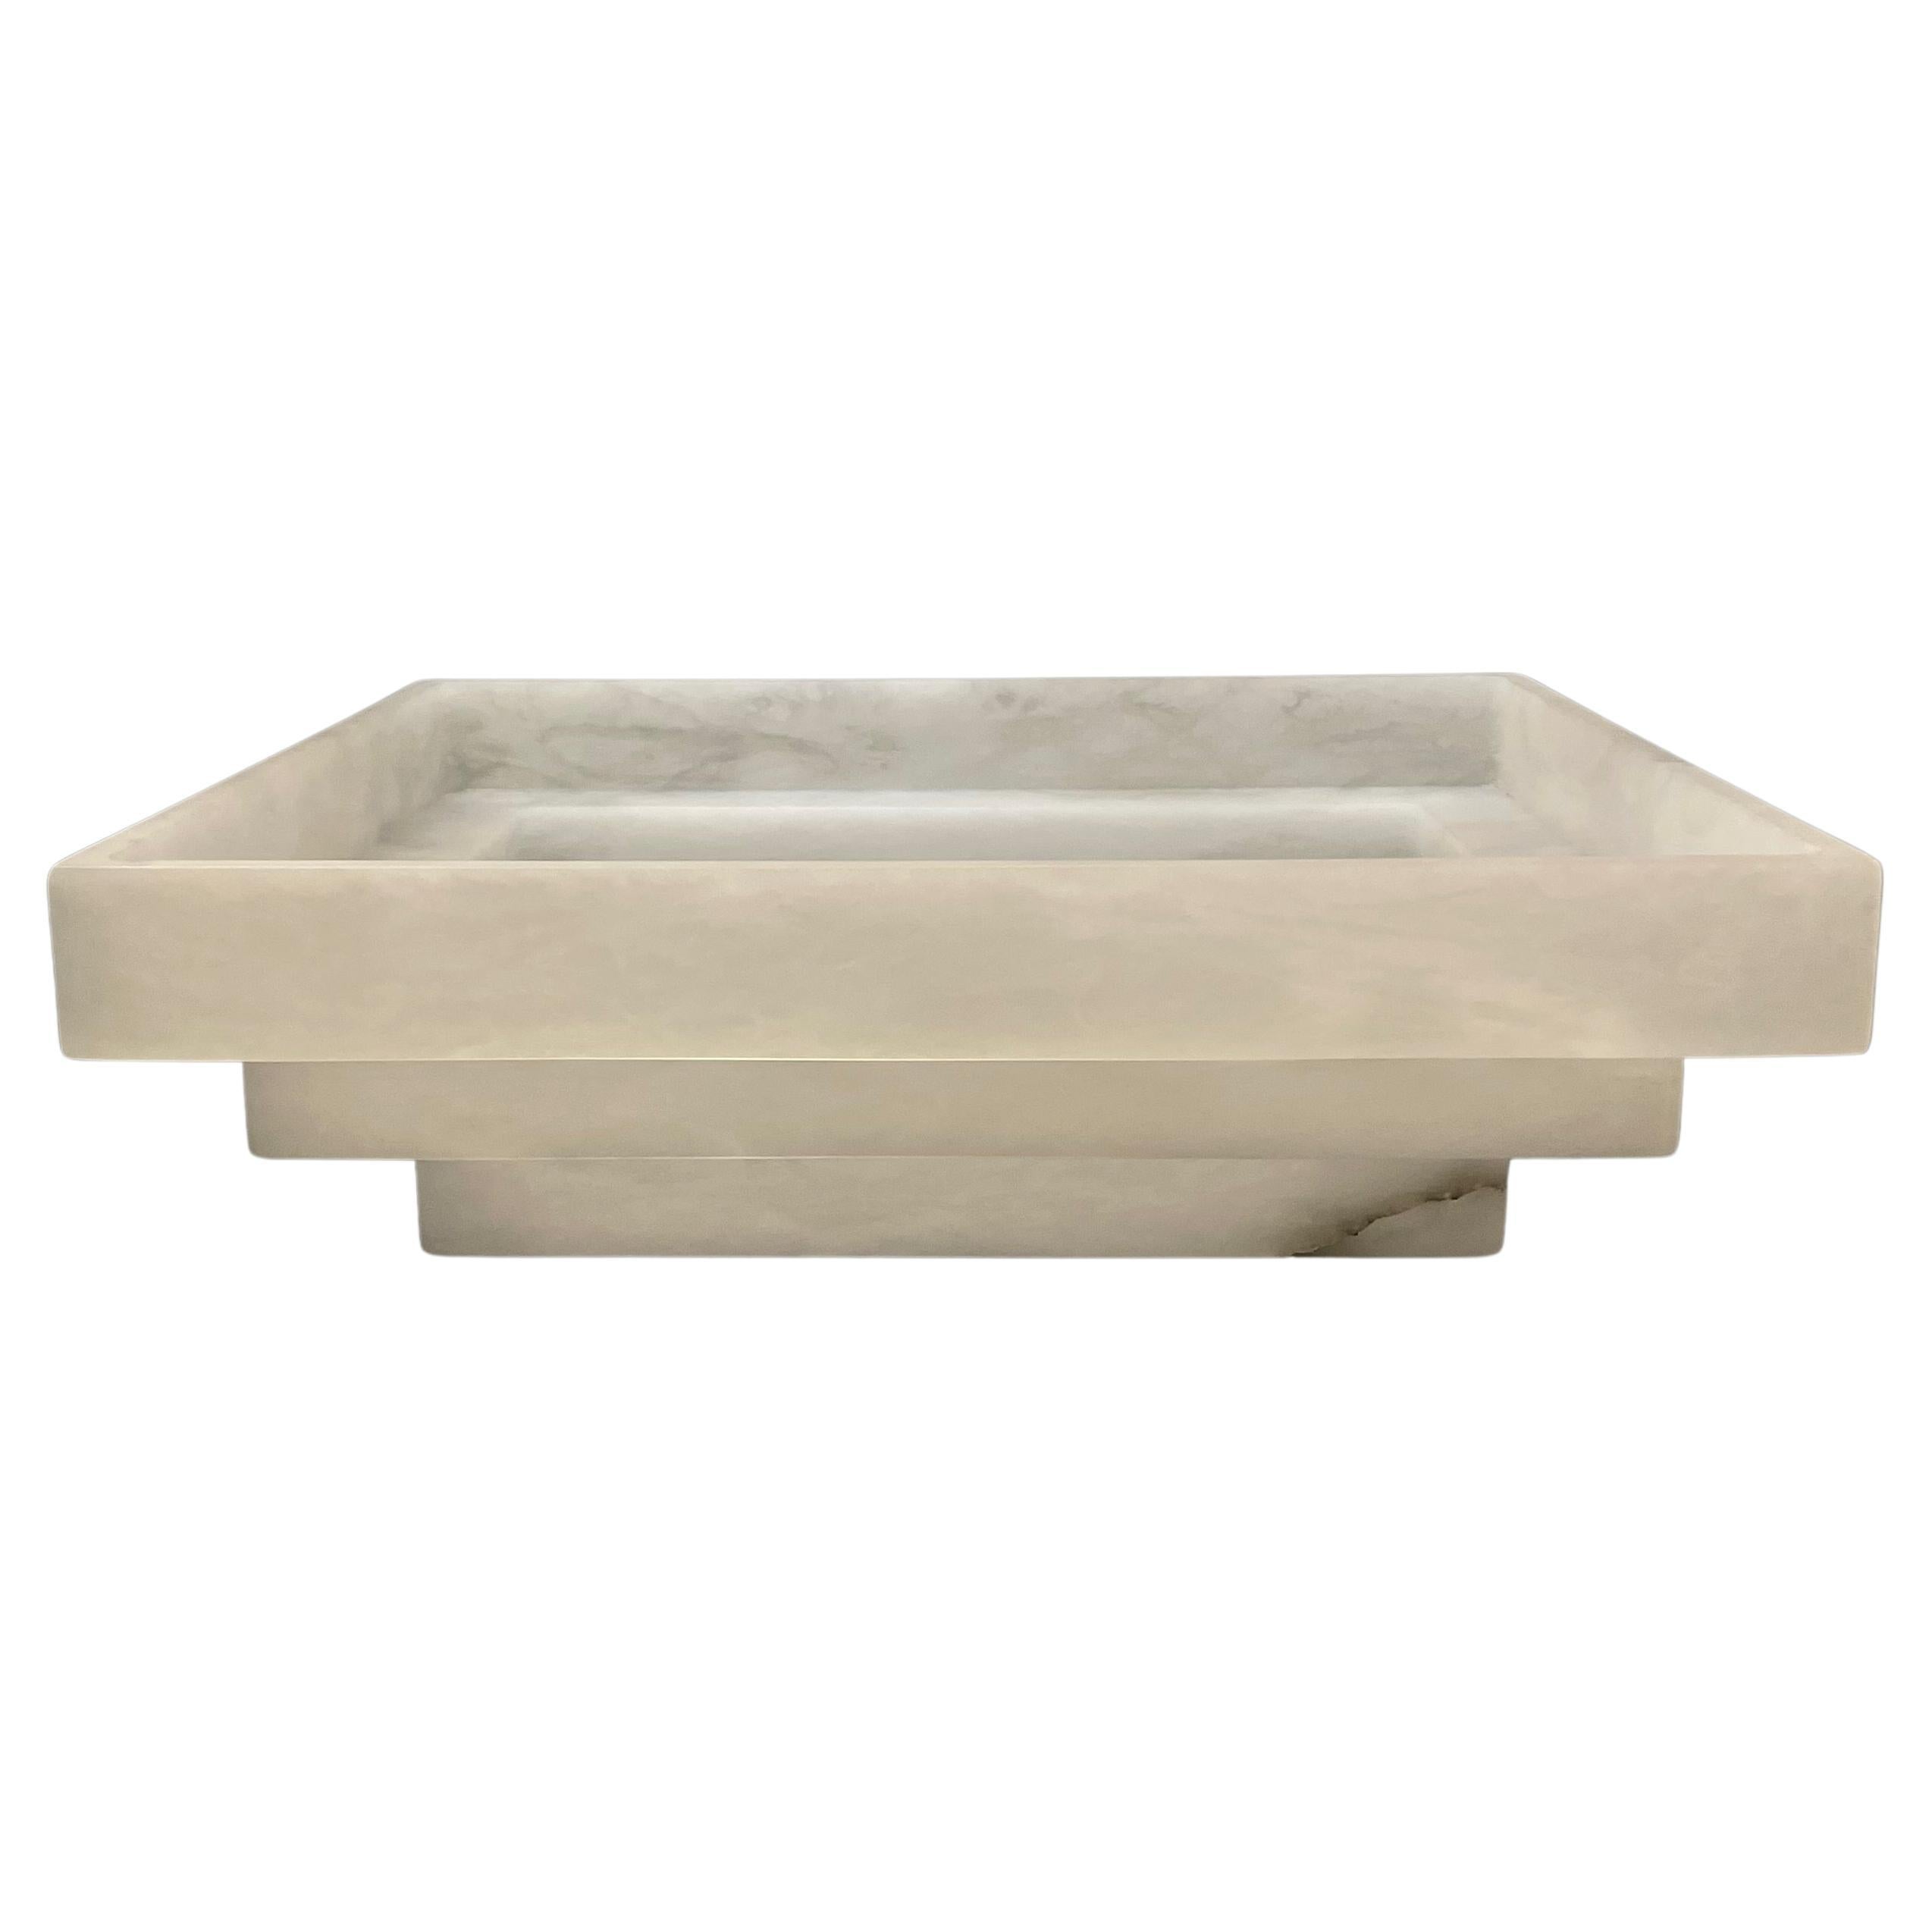 White Alabaster Square Shaped Three Tier Bowl, Italy, Contemporary